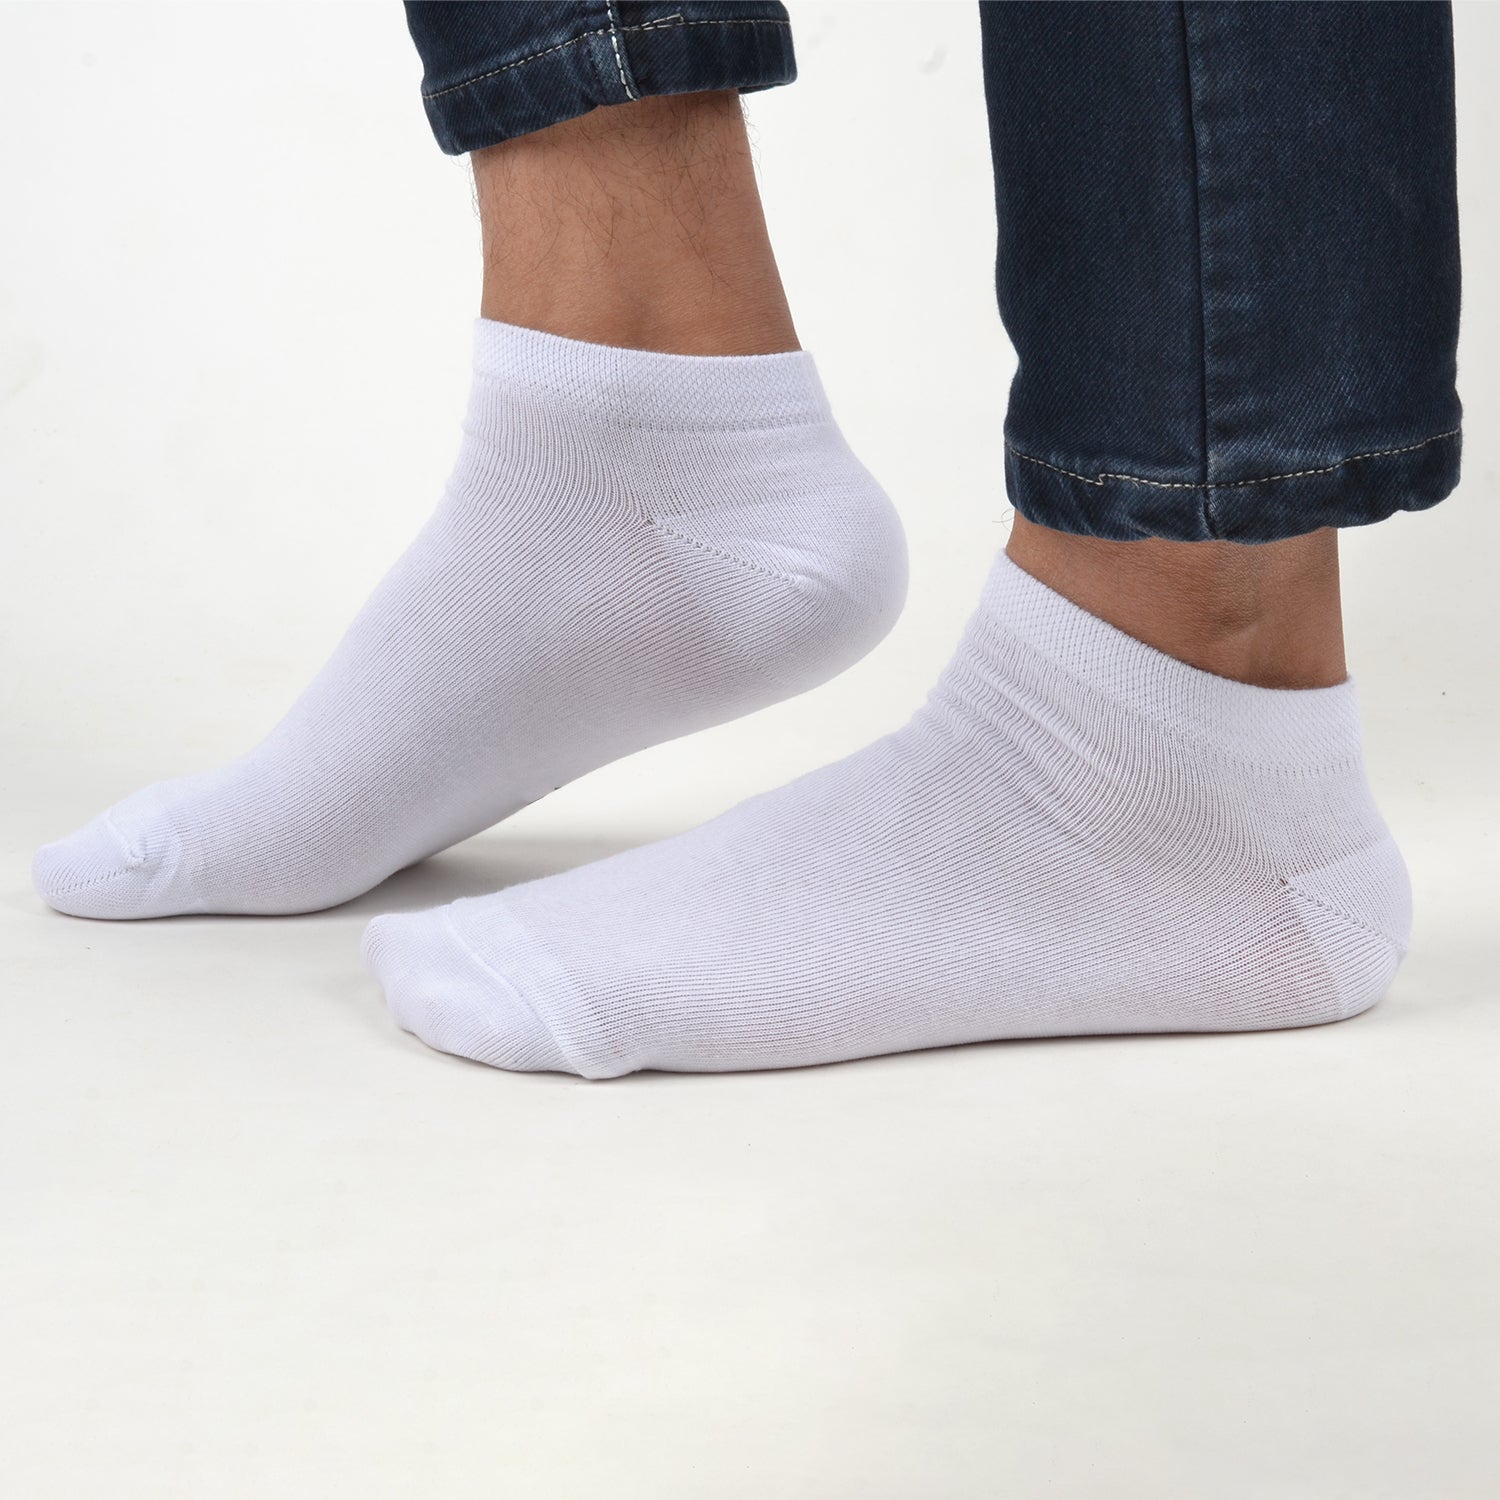 FOOTPRINTS Unisex Solid Cotton Ankle-Length Socks -Pack Of 3